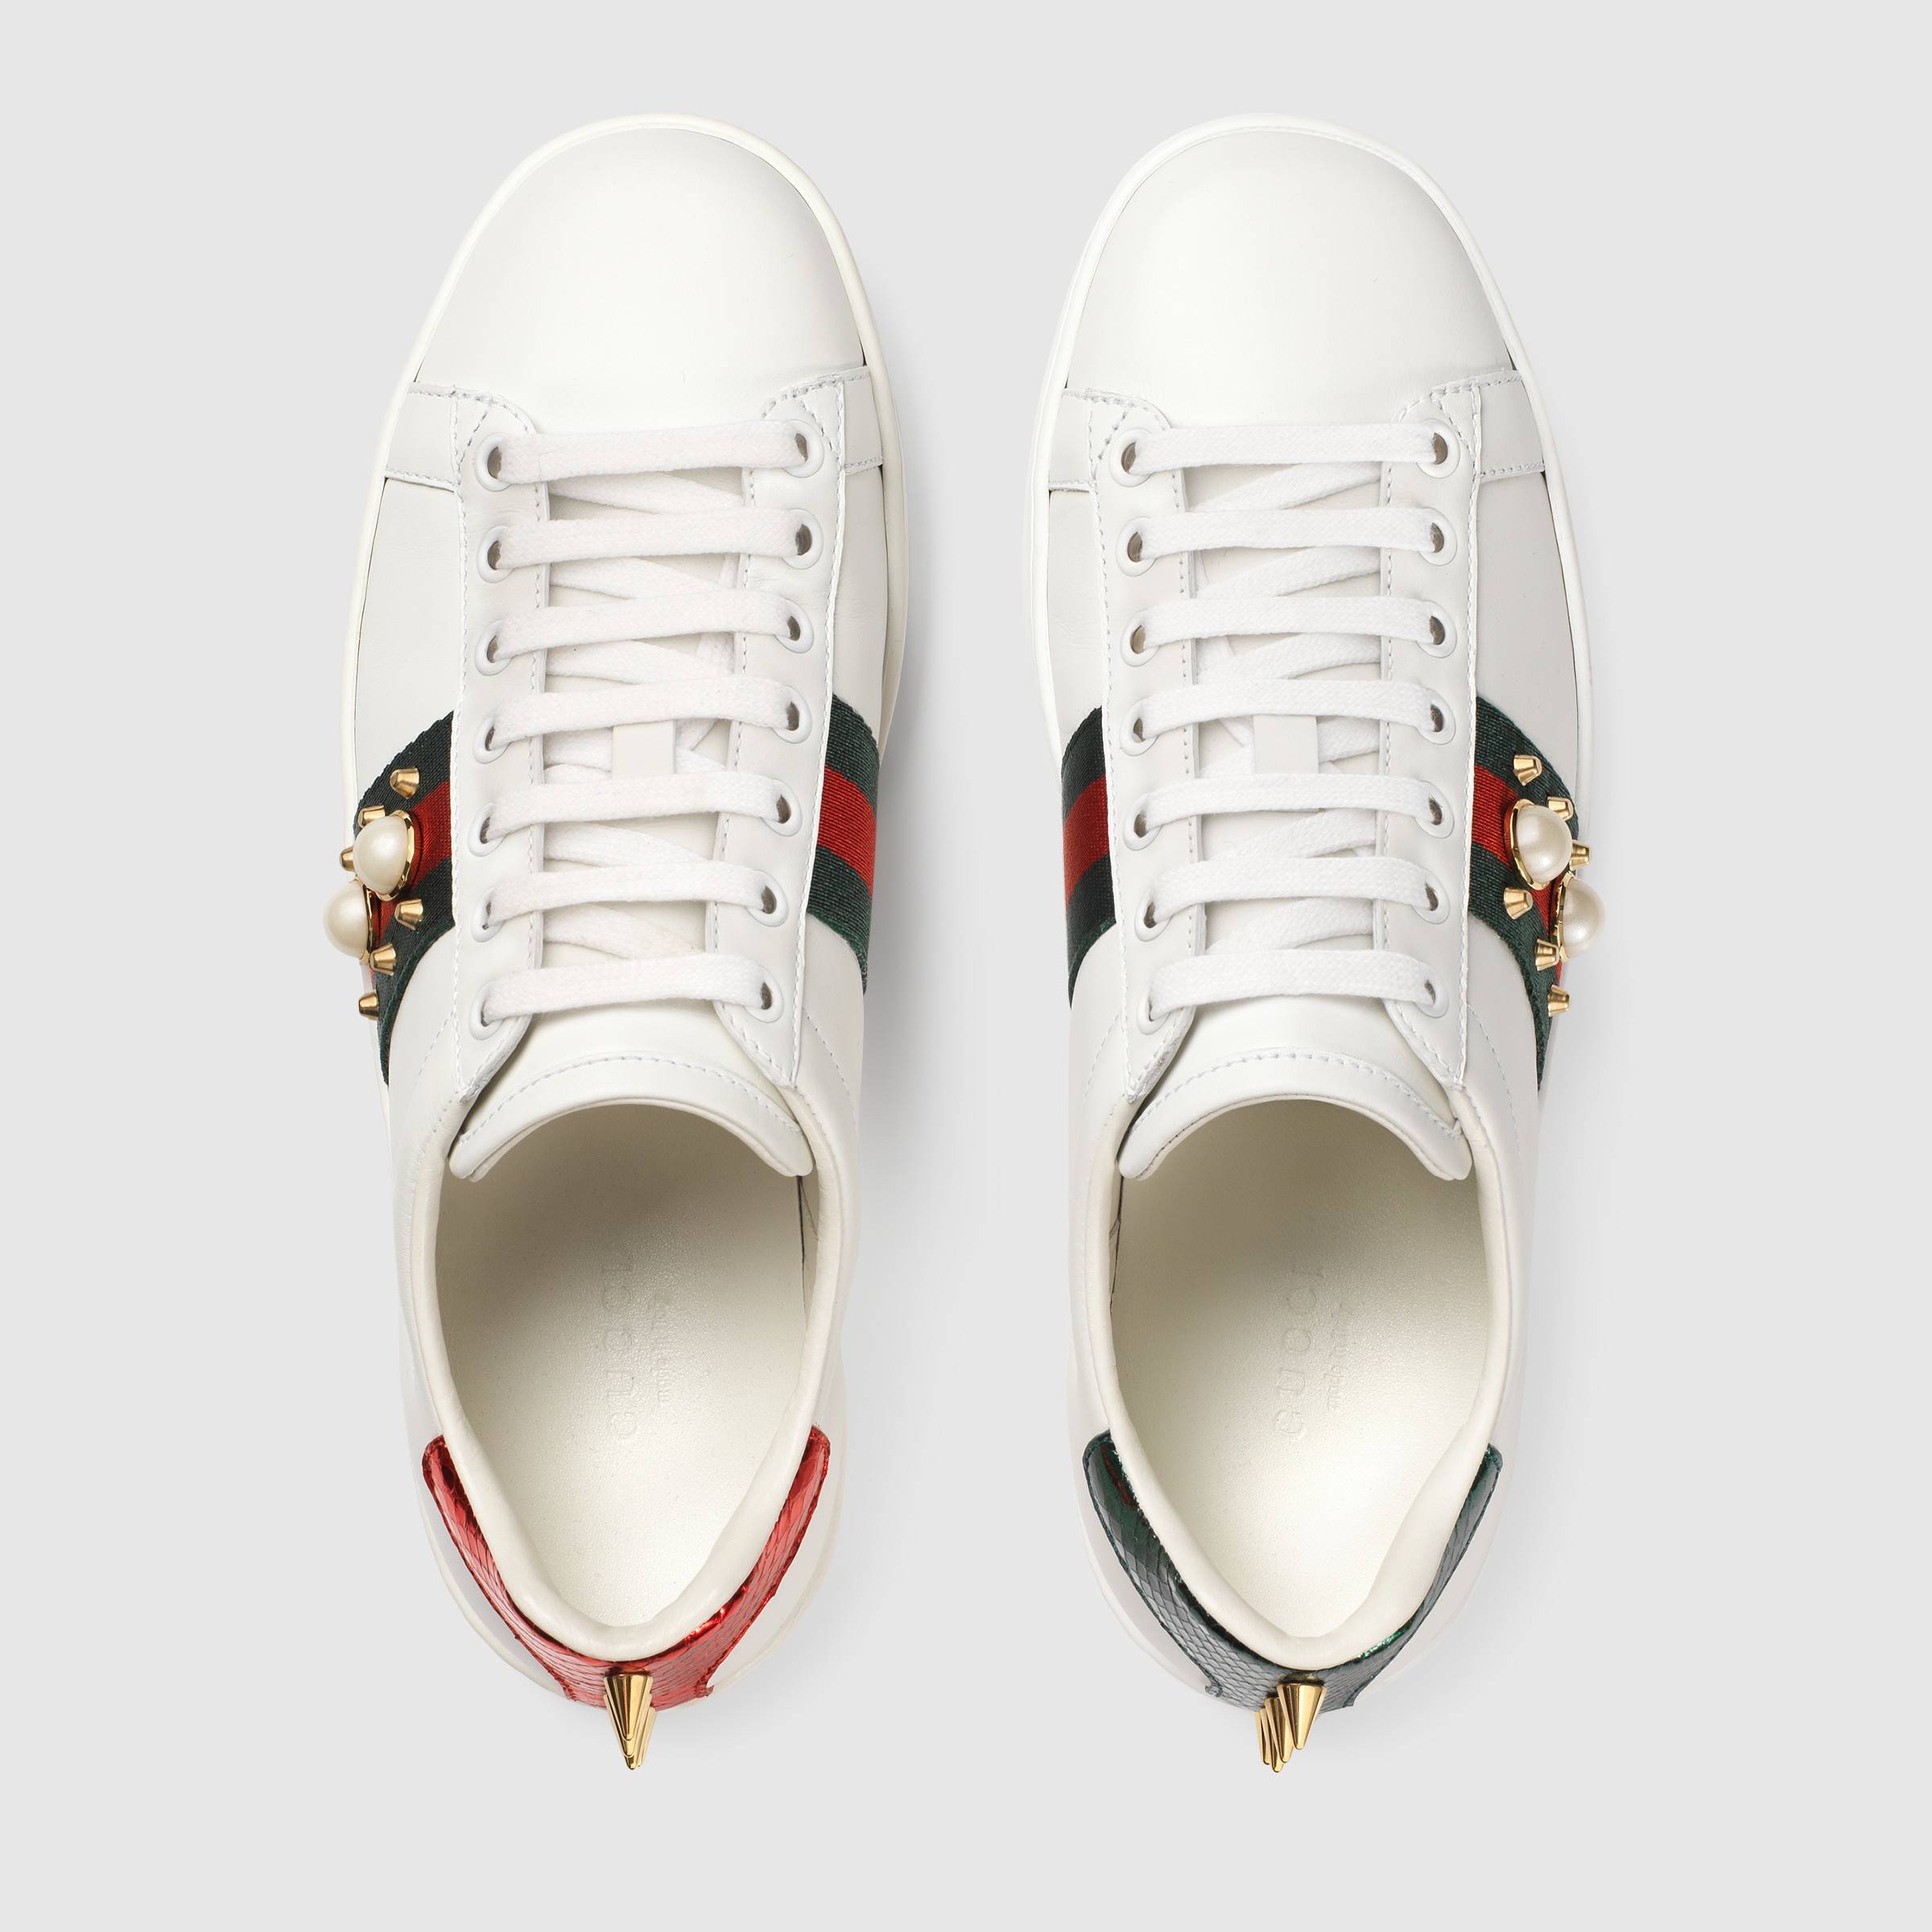 GIÀY GUCCI - ACE SYUDDED LEATHER SNEAKER WITH PEARLS ANDSTUDS